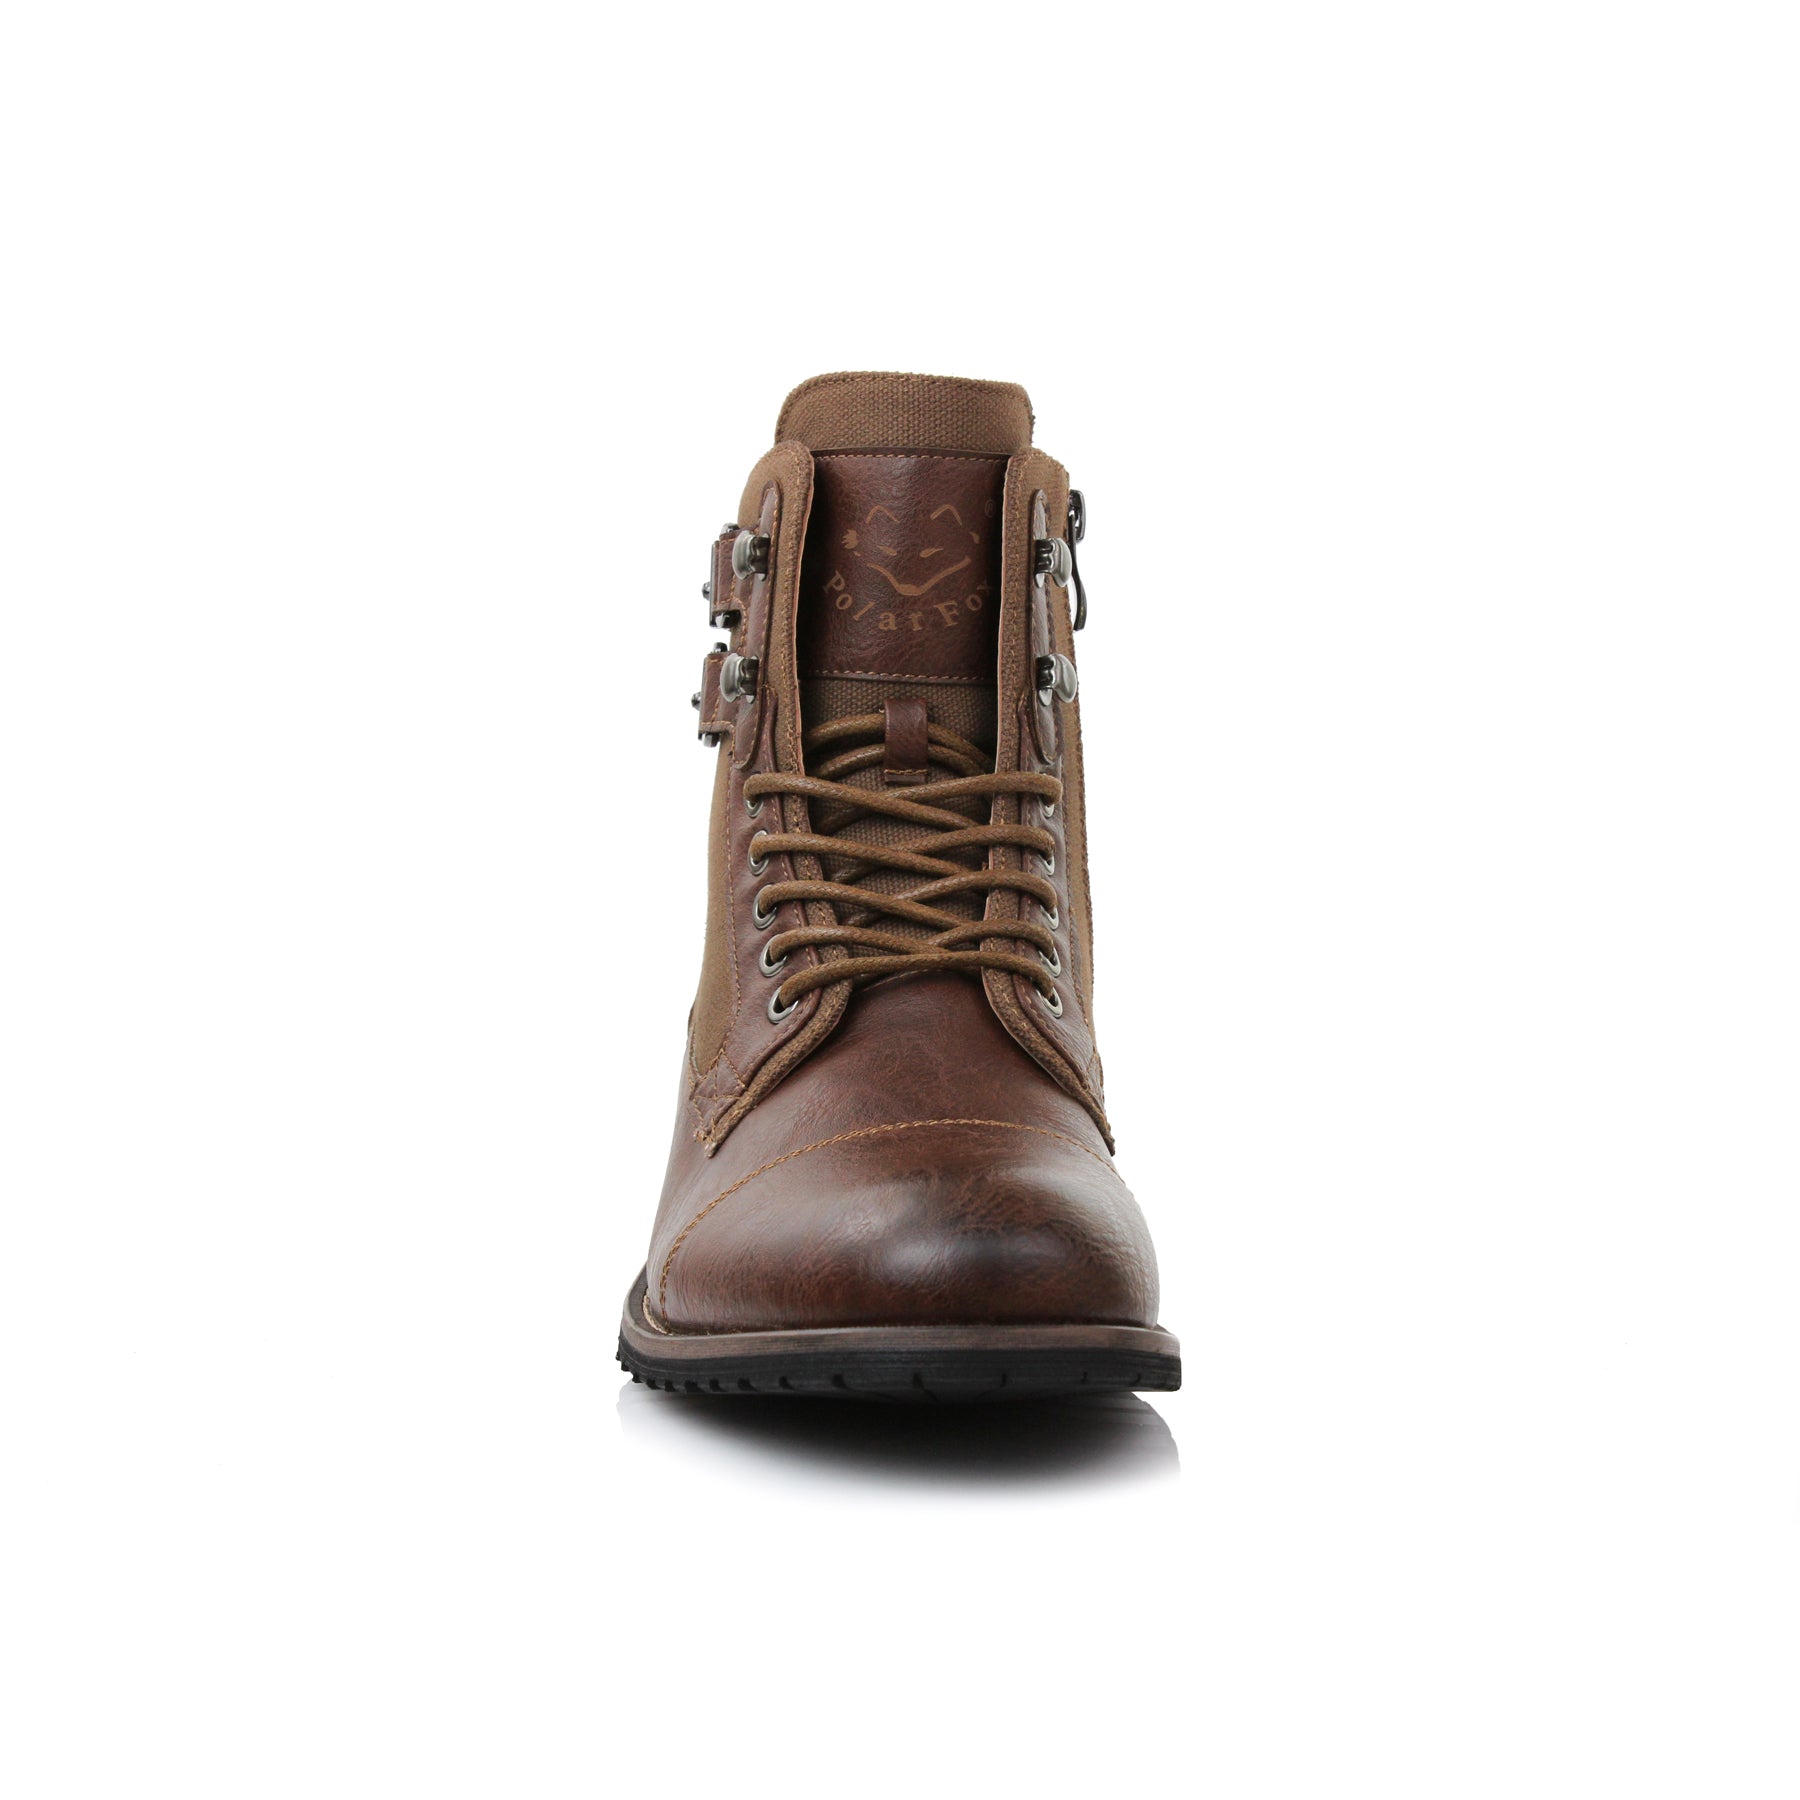 Duo-Textured Combat Boots | Mitch by Polar Fox | Conal Footwear | Front Angle View